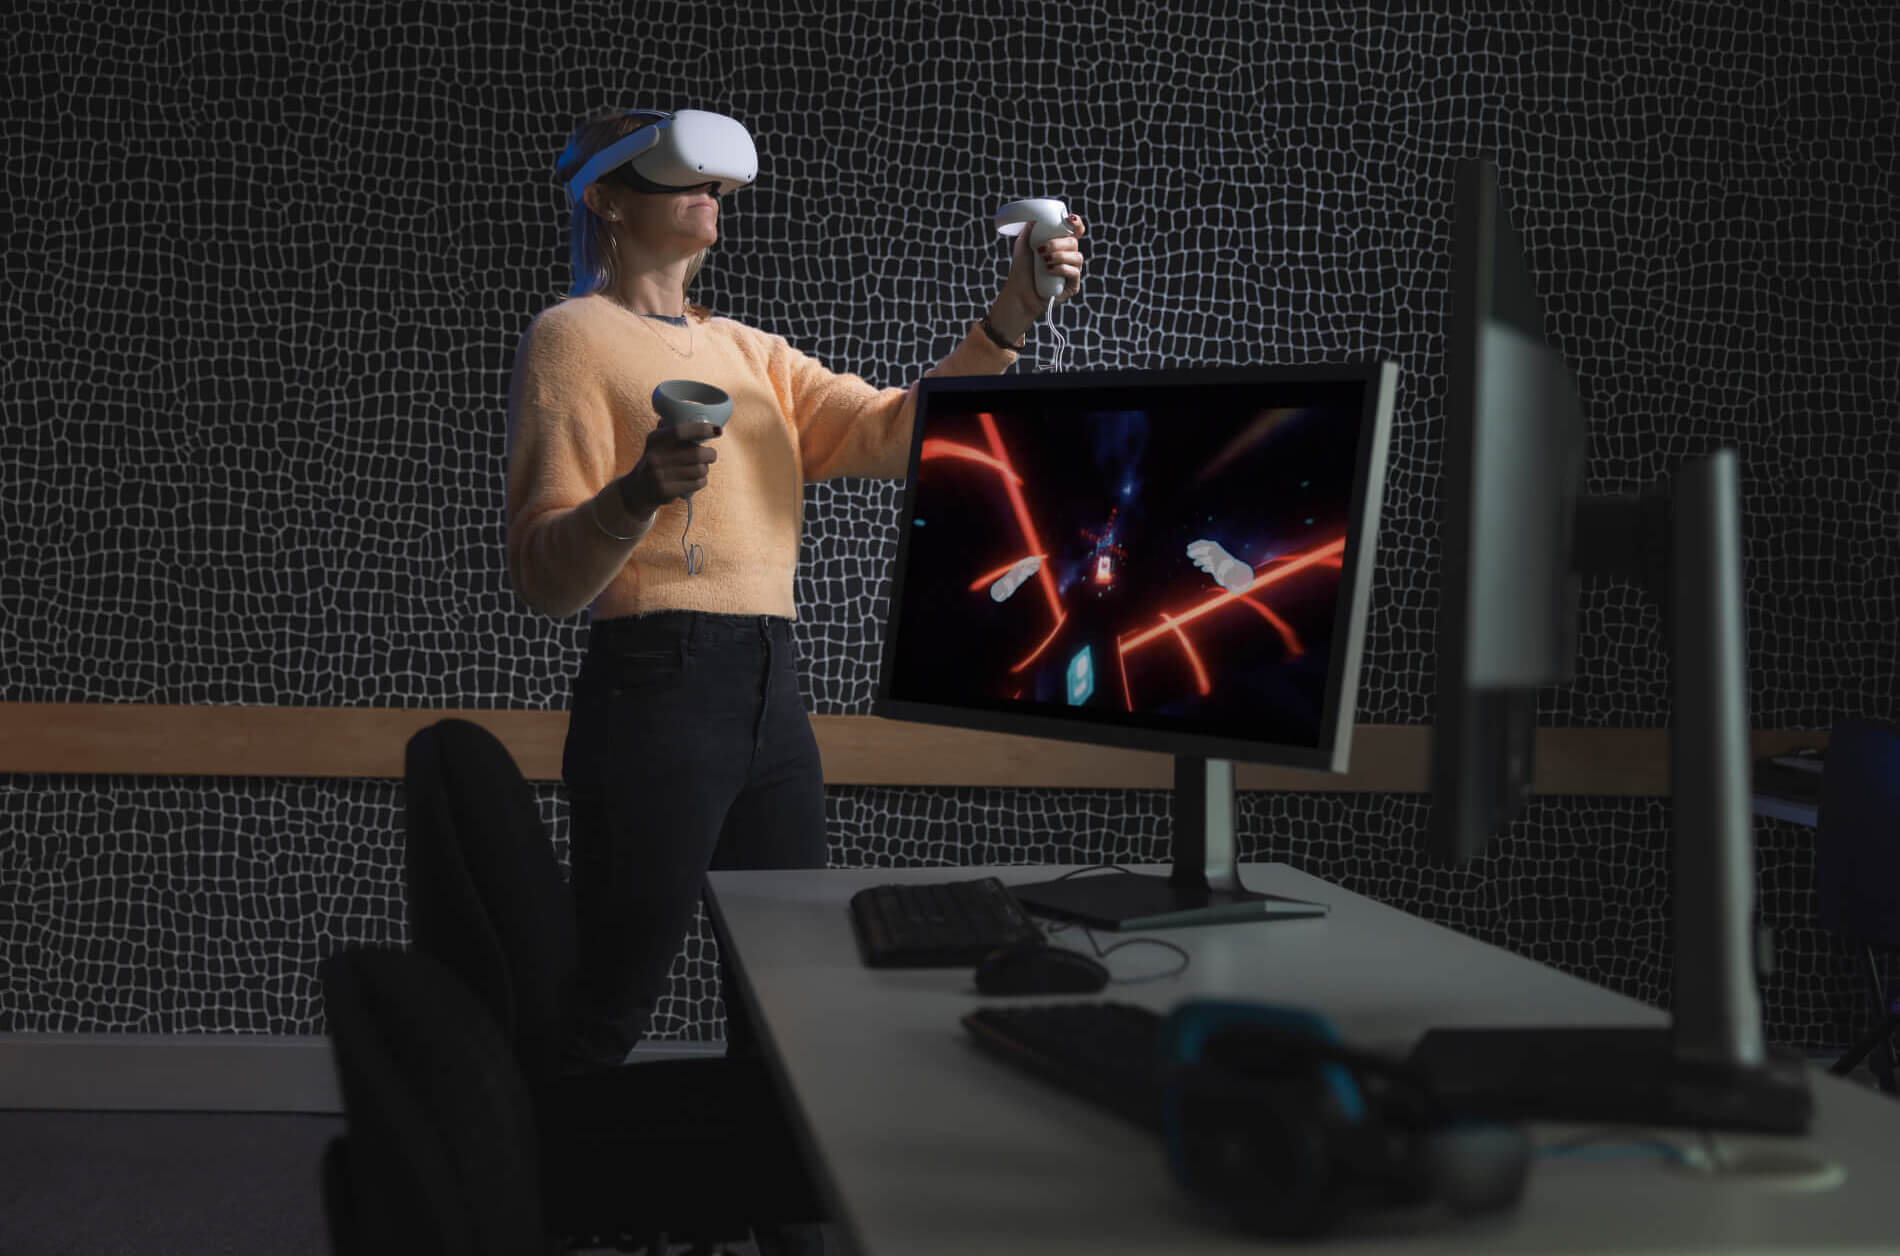 Person wearing VR headset and hand controllers